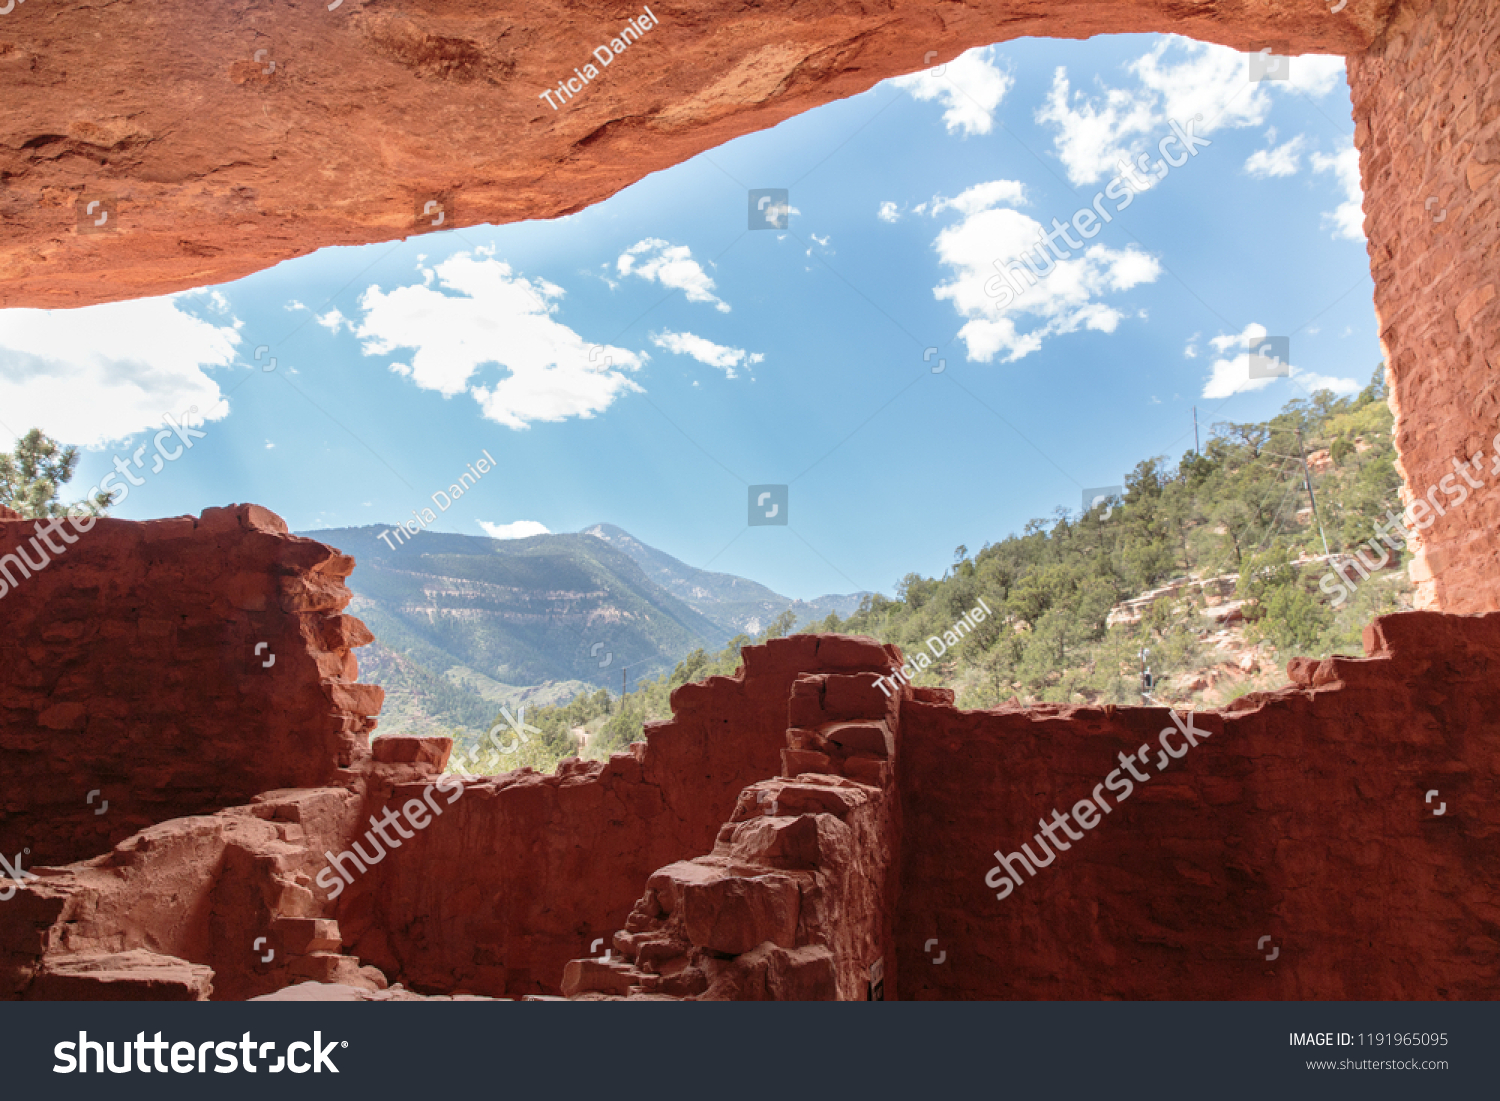 A view from within Manitou Cliff Dwellings an attraction close to Colorado Springs and Manitou Springs, Colorado, USA. #1191965095